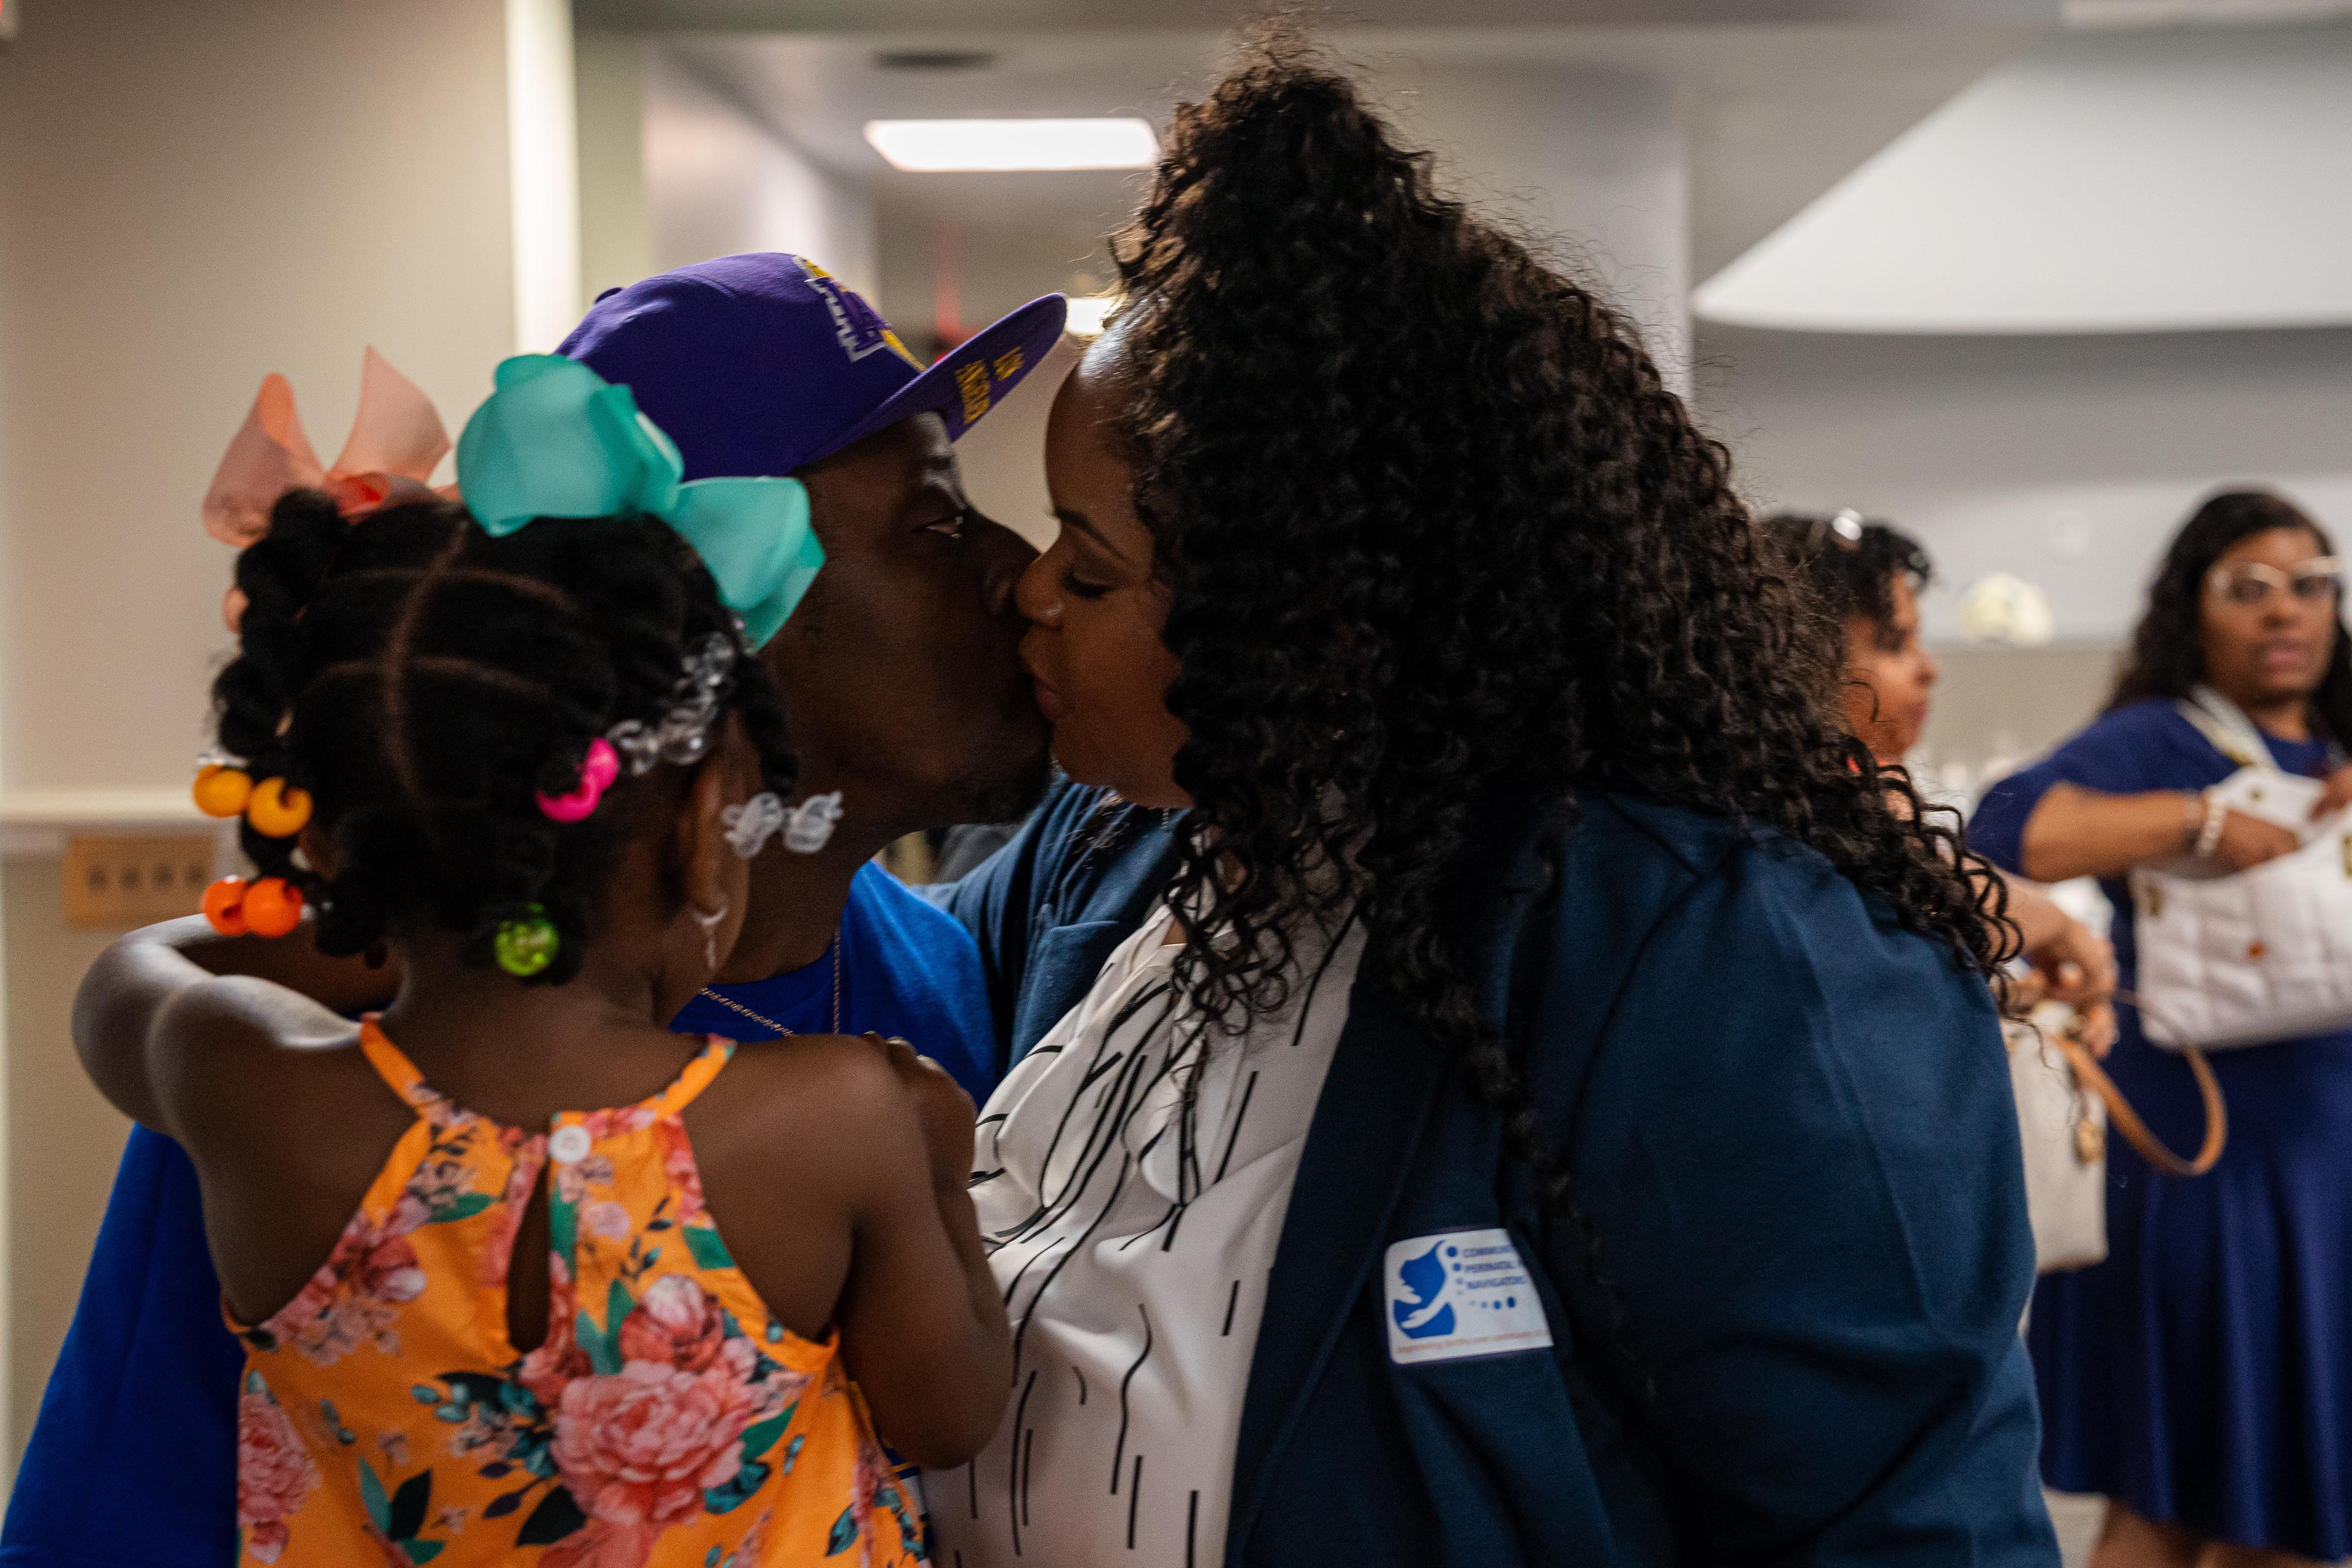 A woman wearing a blue blazer kisses a man, who is wearing in a purple baseball hat and holding a young girl in his arms